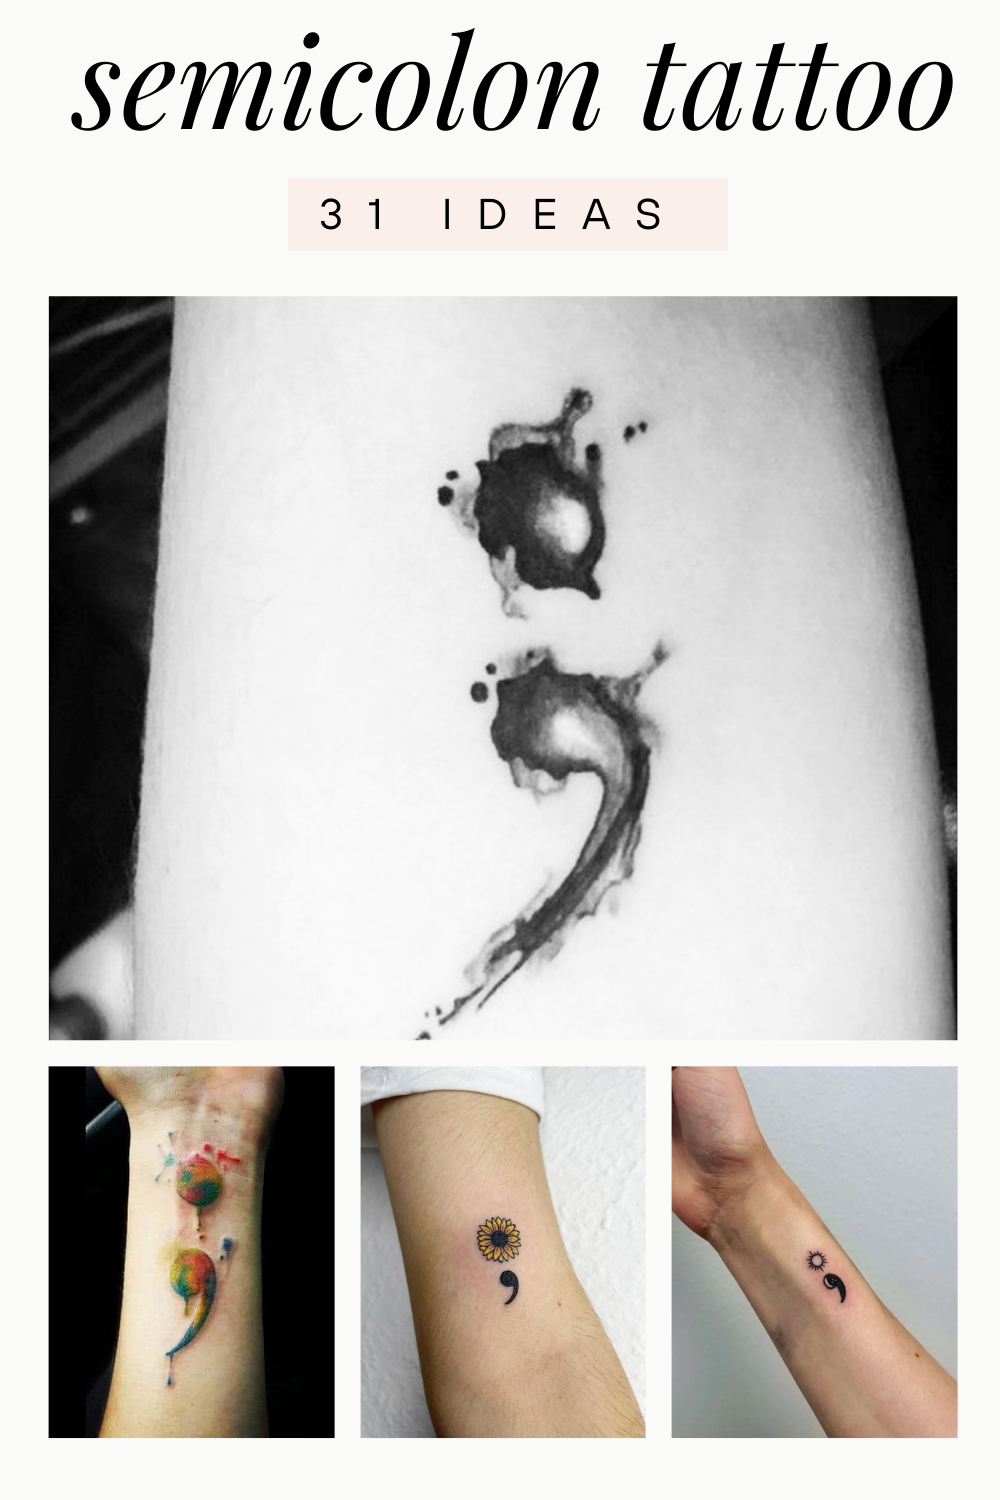 Semicolon Tattoo Ideas For Depression, Addictions, or Anxiety Top Beauty Magazines